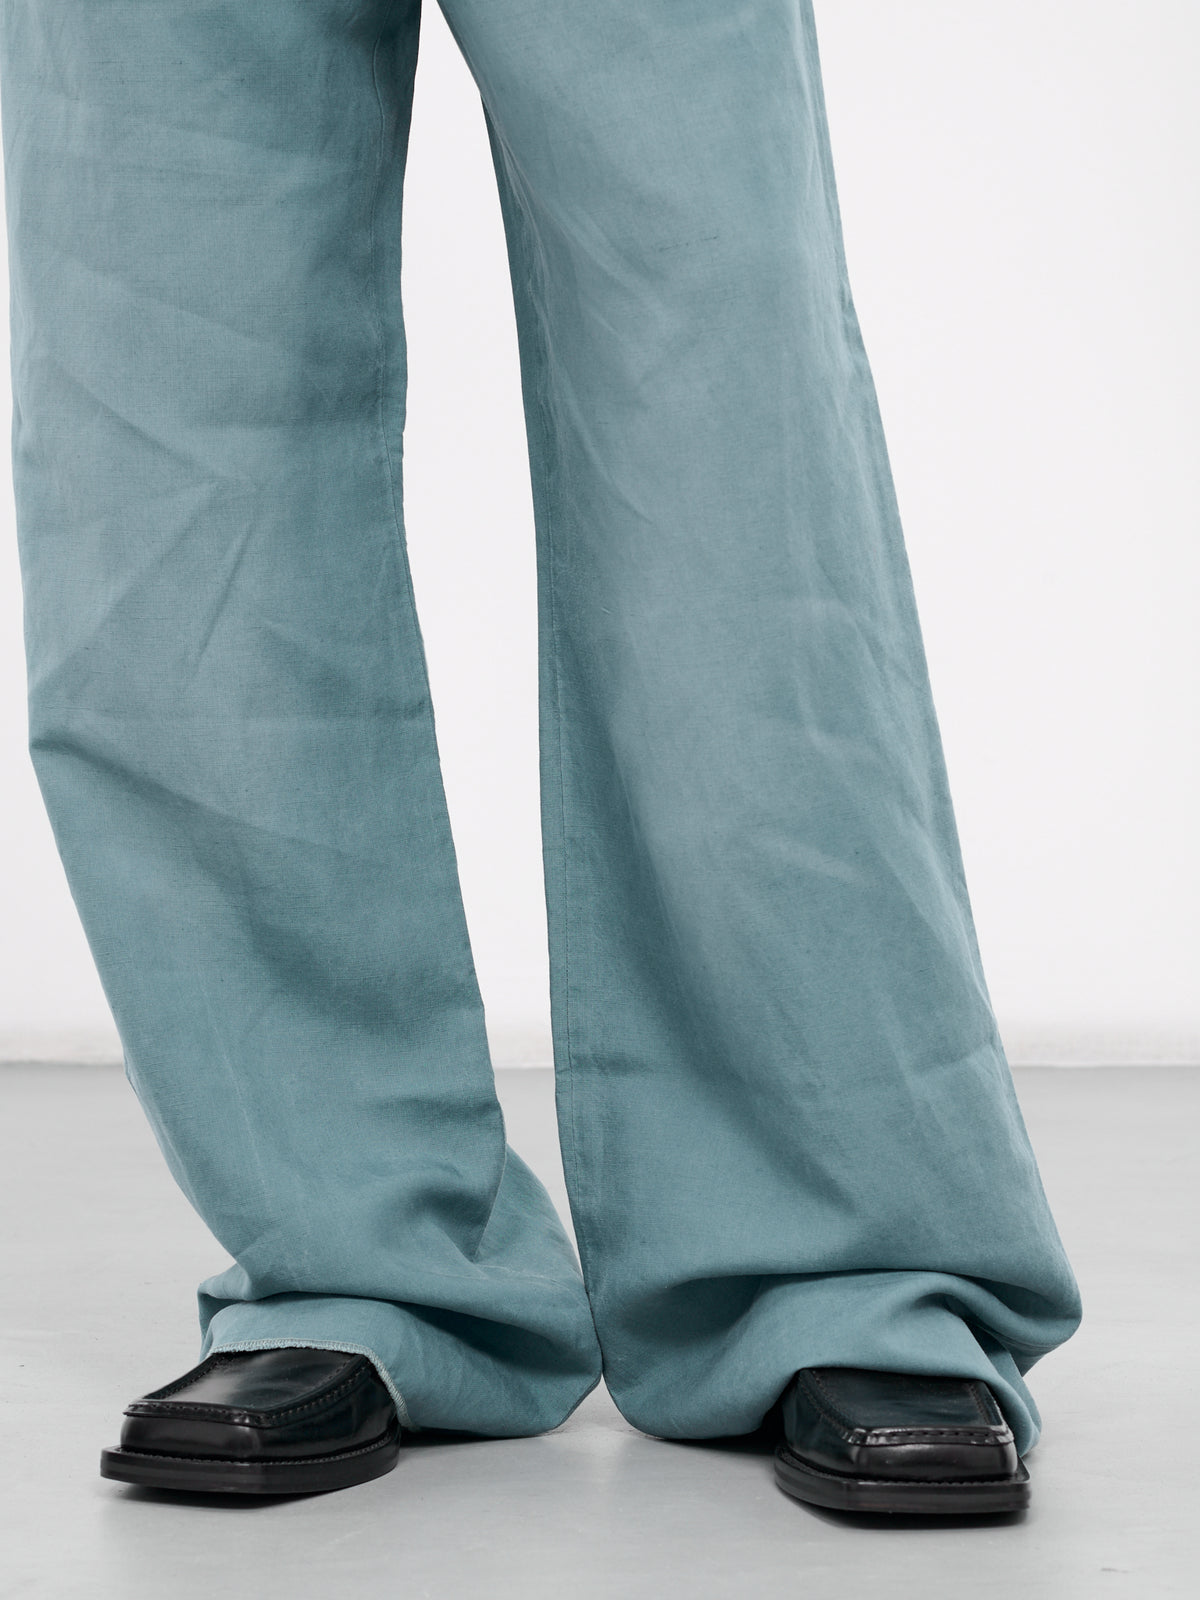 Tailored Extended Leg Trousers (347A-TEAL-SUNBLEACH)